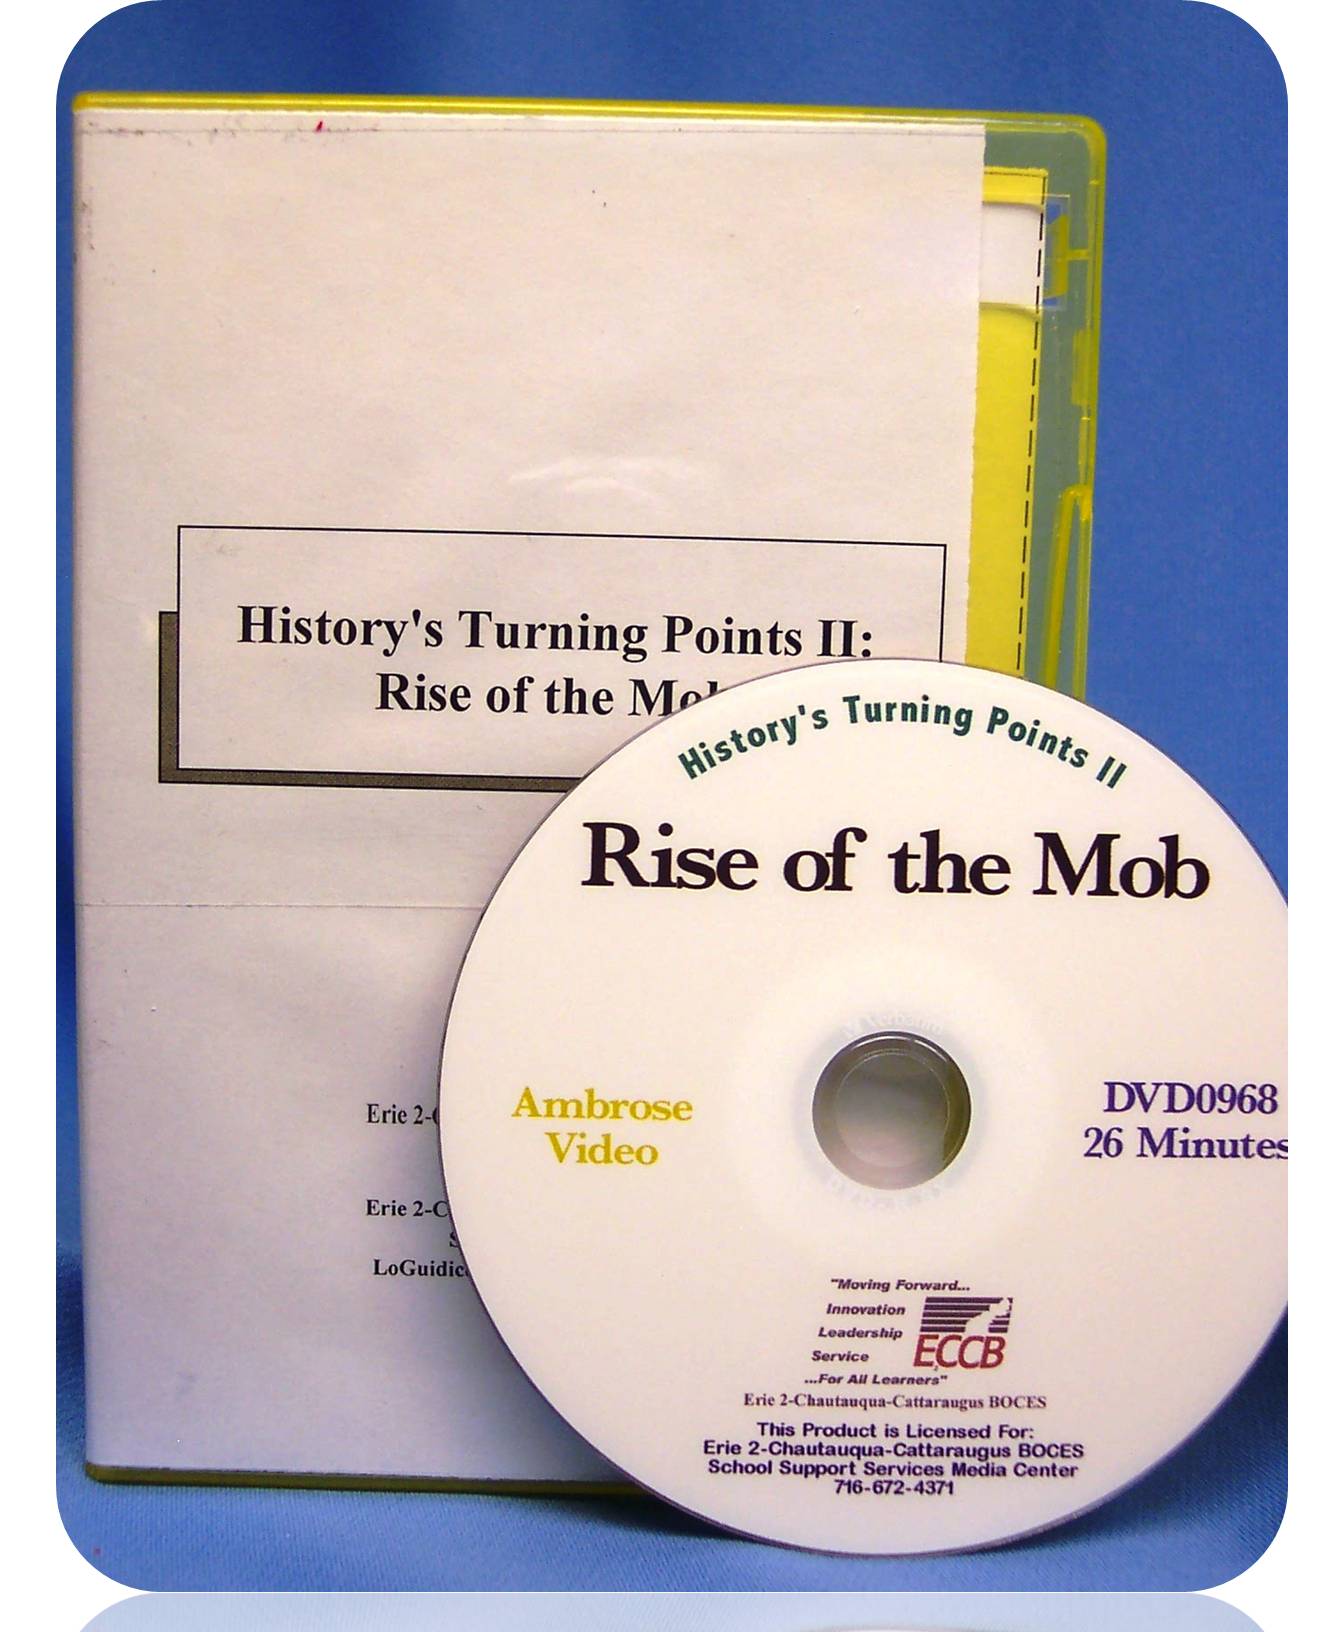 History's Turning Points II: Rise of the Mob